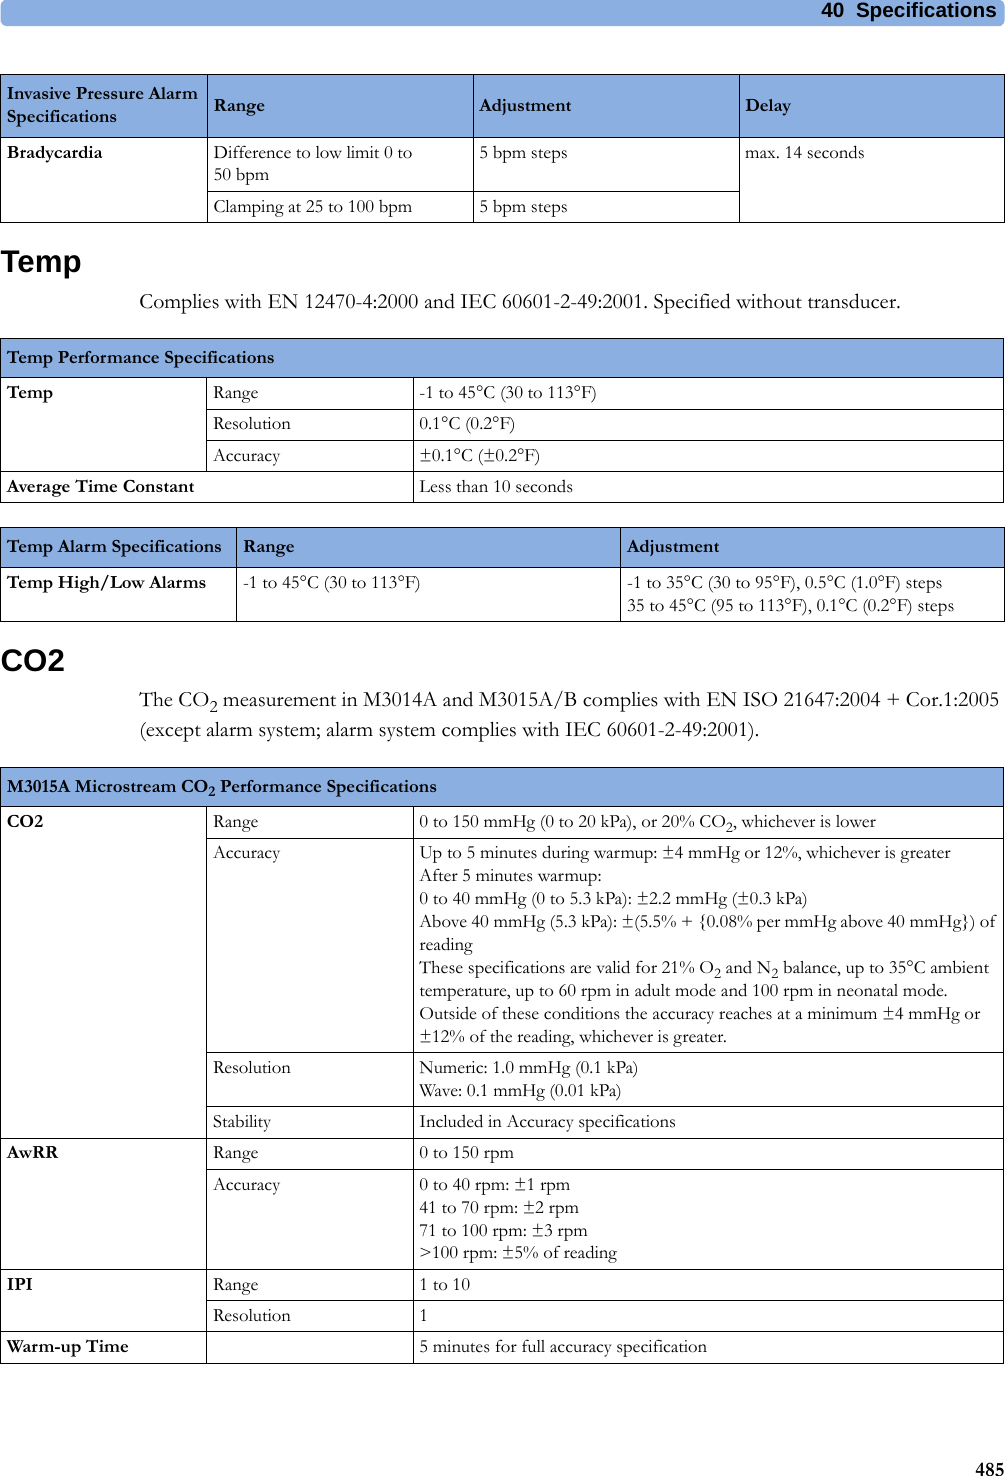 40 Specifications485TempComplies with EN 12470-4:2000 and IEC 60601-2-49:2001. Specified without transducer.CO2The CO2 measurement in M3014A and M3015A/B complies with EN ISO 21647:2004 + Cor.1:2005 (except alarm system; alarm system complies with IEC 60601-2-49:2001).Bradycardia Difference to low limit 0 to 50 bpm5 bpm steps max. 14 secondsClamping at 25 to 100 bpm 5 bpm stepsInvasive Pressure Alarm Specifications Range Adjustment DelayTemp Performance SpecificationsTemp Range -1 to 45°C (30 to 113°F)Resolution 0.1°C (0.2°F)Accuracy ±0.1°C (±0.2°F)Average Time Constant Less than 10 secondsTemp Alarm Specifications Range AdjustmentTemp High/Low Alarms -1 to 45°C (30 to 113°F) -1 to 35°C (30 to 95°F), 0.5°C (1.0°F) steps35 to 45°C (95 to 113°F), 0.1°C (0.2°F) stepsM3015A Microstream CO2 Performance SpecificationsCO2 Range  0 to 150 mmHg (0 to 20 kPa), or 20% CO2, whichever is lowerAccuracy Up to 5 minutes during warmup: ±4 mmHg or 12%, whichever is greaterAfter 5 minutes warmup:0 to 40 mmHg (0 to 5.3 kPa): ±2.2 mmHg (±0.3 kPa)Above 40 mmHg (5.3 kPa): ±(5.5% + {0.08% per mmHg above 40 mmHg}) of readingThese specifications are valid for 21% O2 and N2 balance, up to 35°C ambient temperature, up to 60 rpm in adult mode and 100 rpm in neonatal mode. Outside of these conditions the accuracy reaches at a minimum ±4 mmHg or ±12% of the reading, whichever is greater.Resolution Numeric: 1.0 mmHg (0.1 kPa)Wave: 0.1 mmHg (0.01 kPa)Stability Included in Accuracy specificationsAwRR Range 0 to 150 rpmAccuracy 0 to 40 rpm: ±1 rpm41 to 70 rpm: ±2 rpm71 to 100 rpm: ±3 rpm&gt;100 rpm: ±5% of readingIPI Range 1 to 10Resolution 1Warm-up Time 5 minutes for full accuracy specification